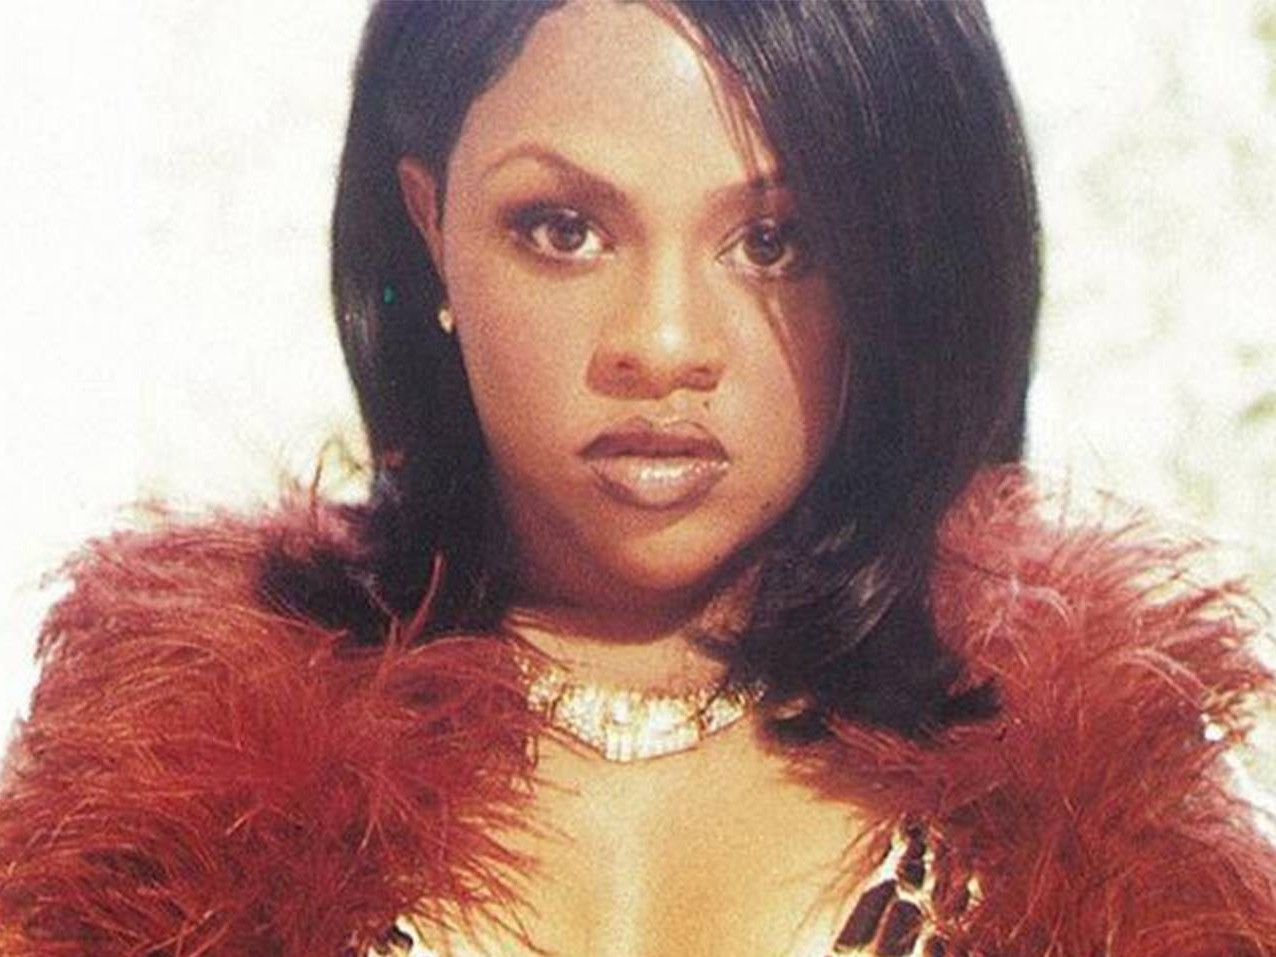 Who was better looking: lil Kim vs Foxy brown | Lipstick Alley